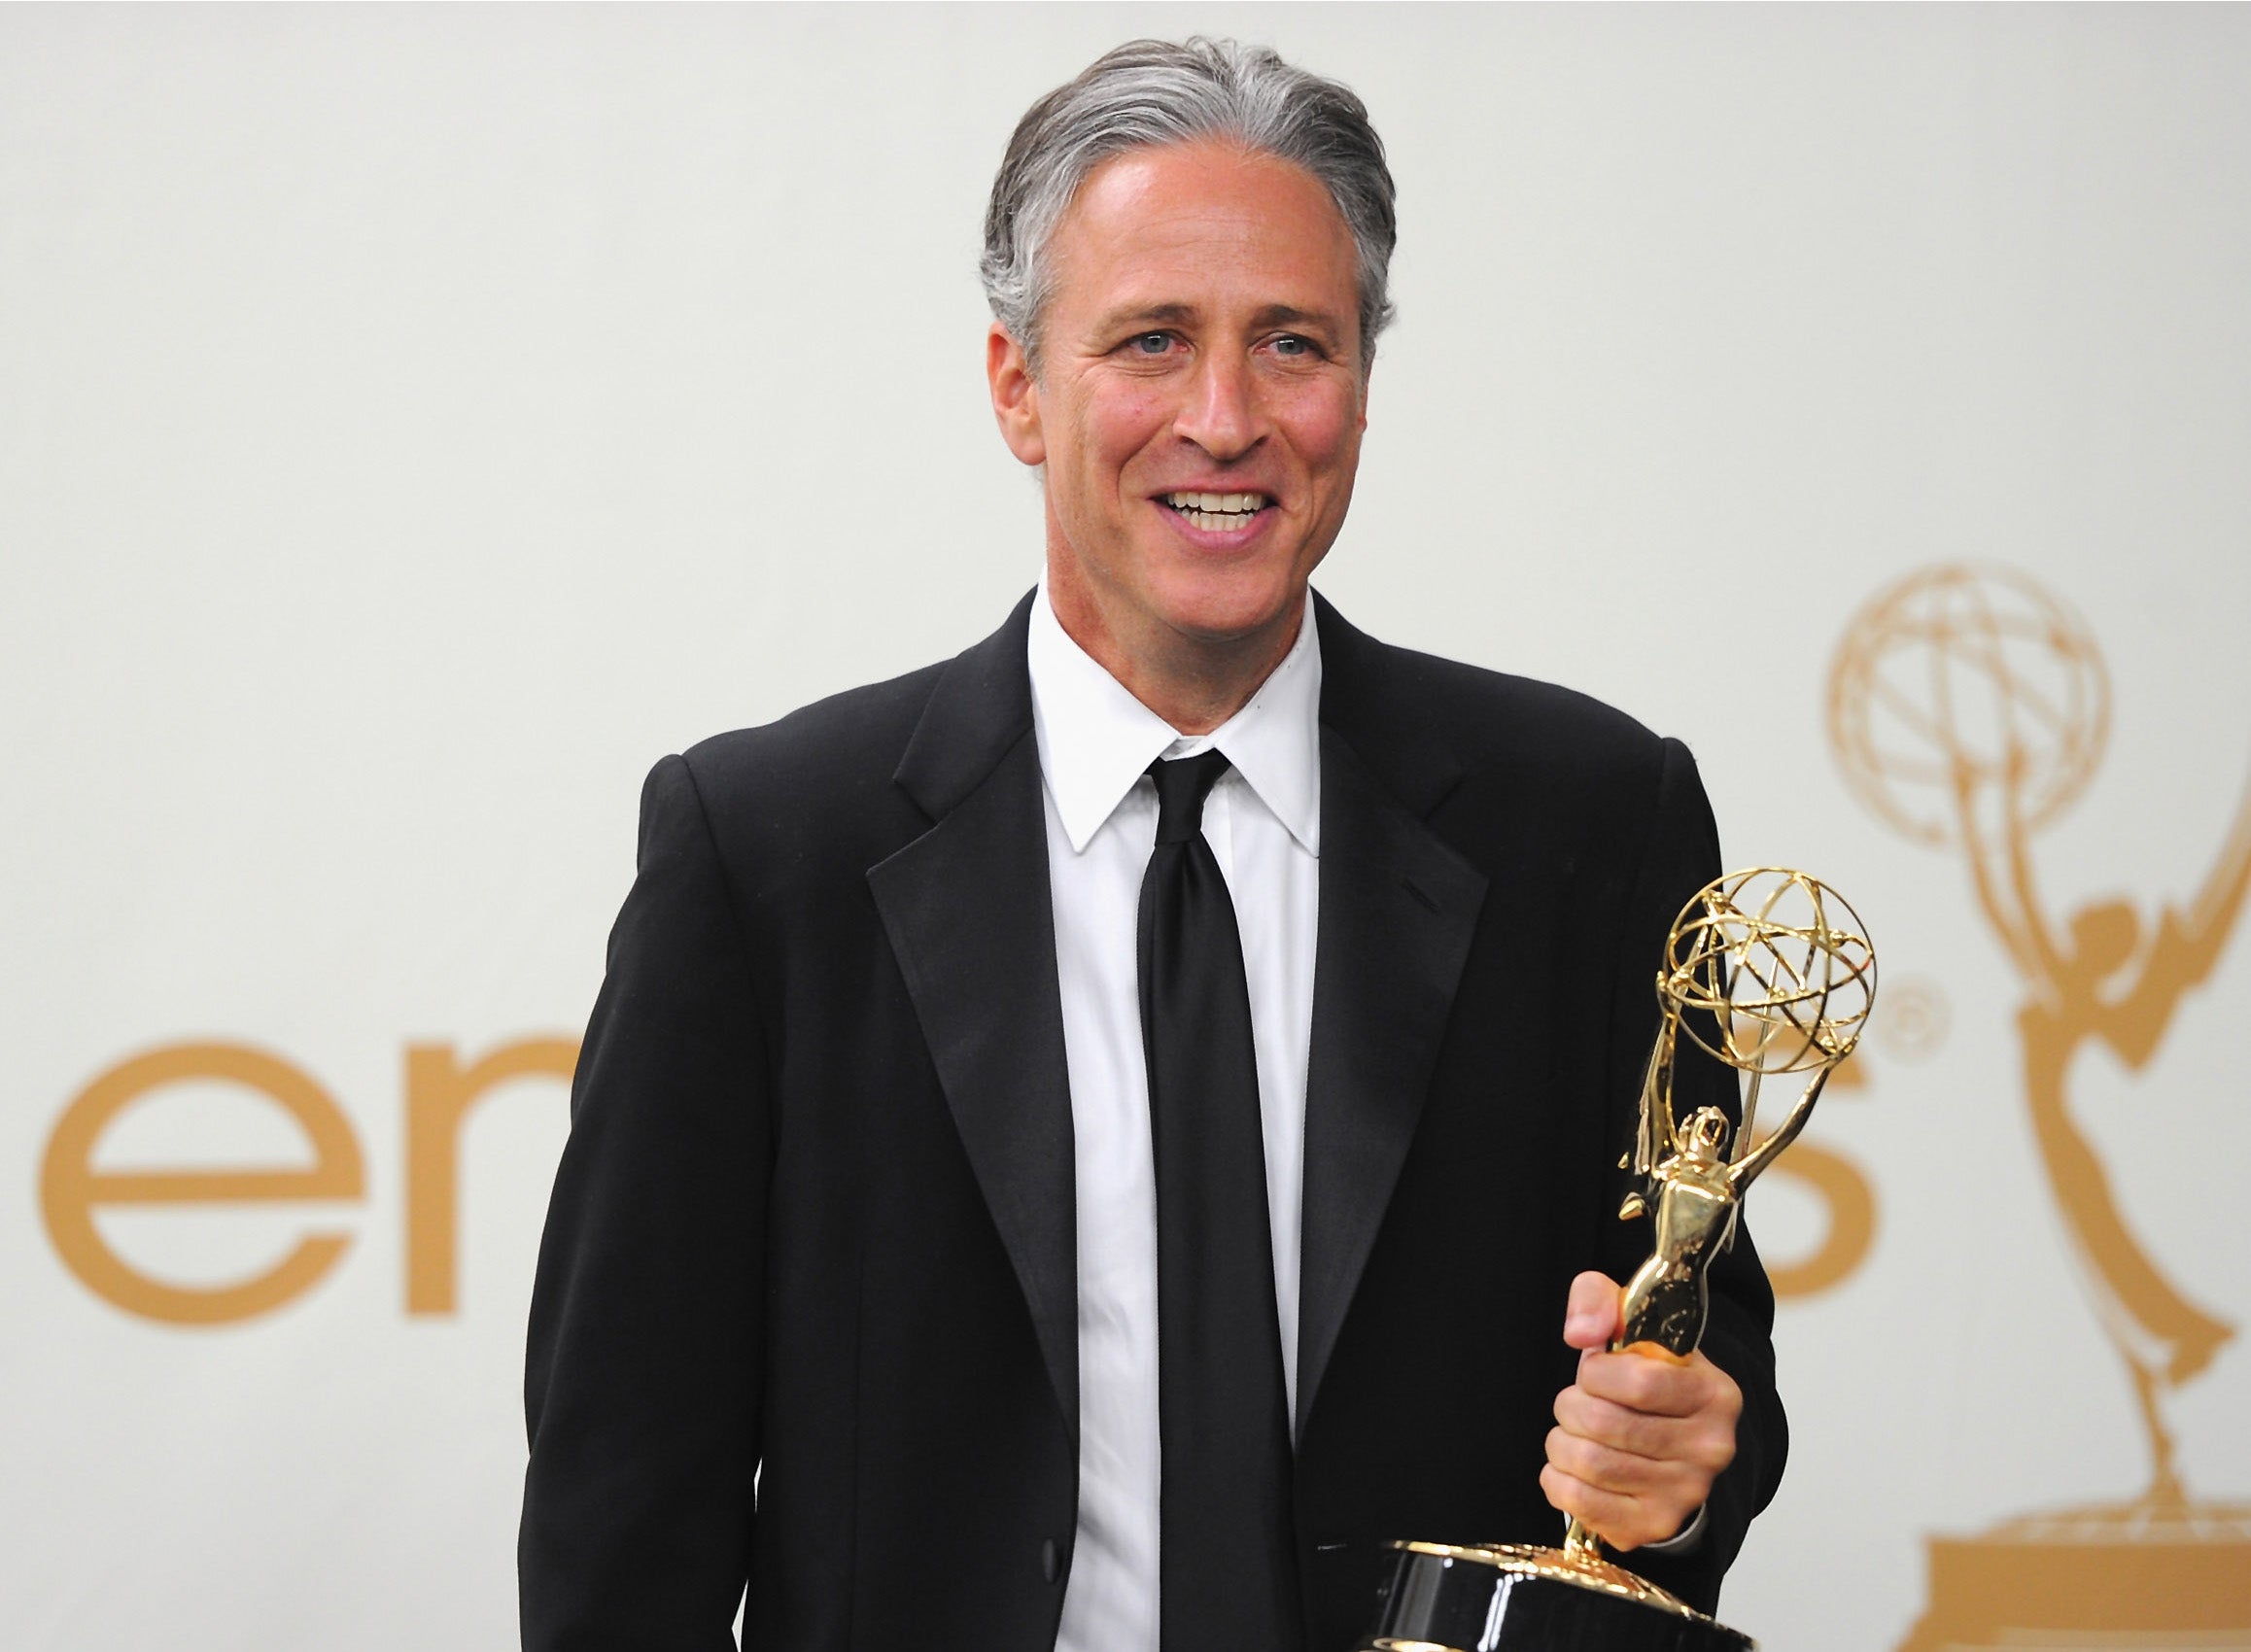 The Daily Show with Jon Stewart picked up its 10th Emmy award.